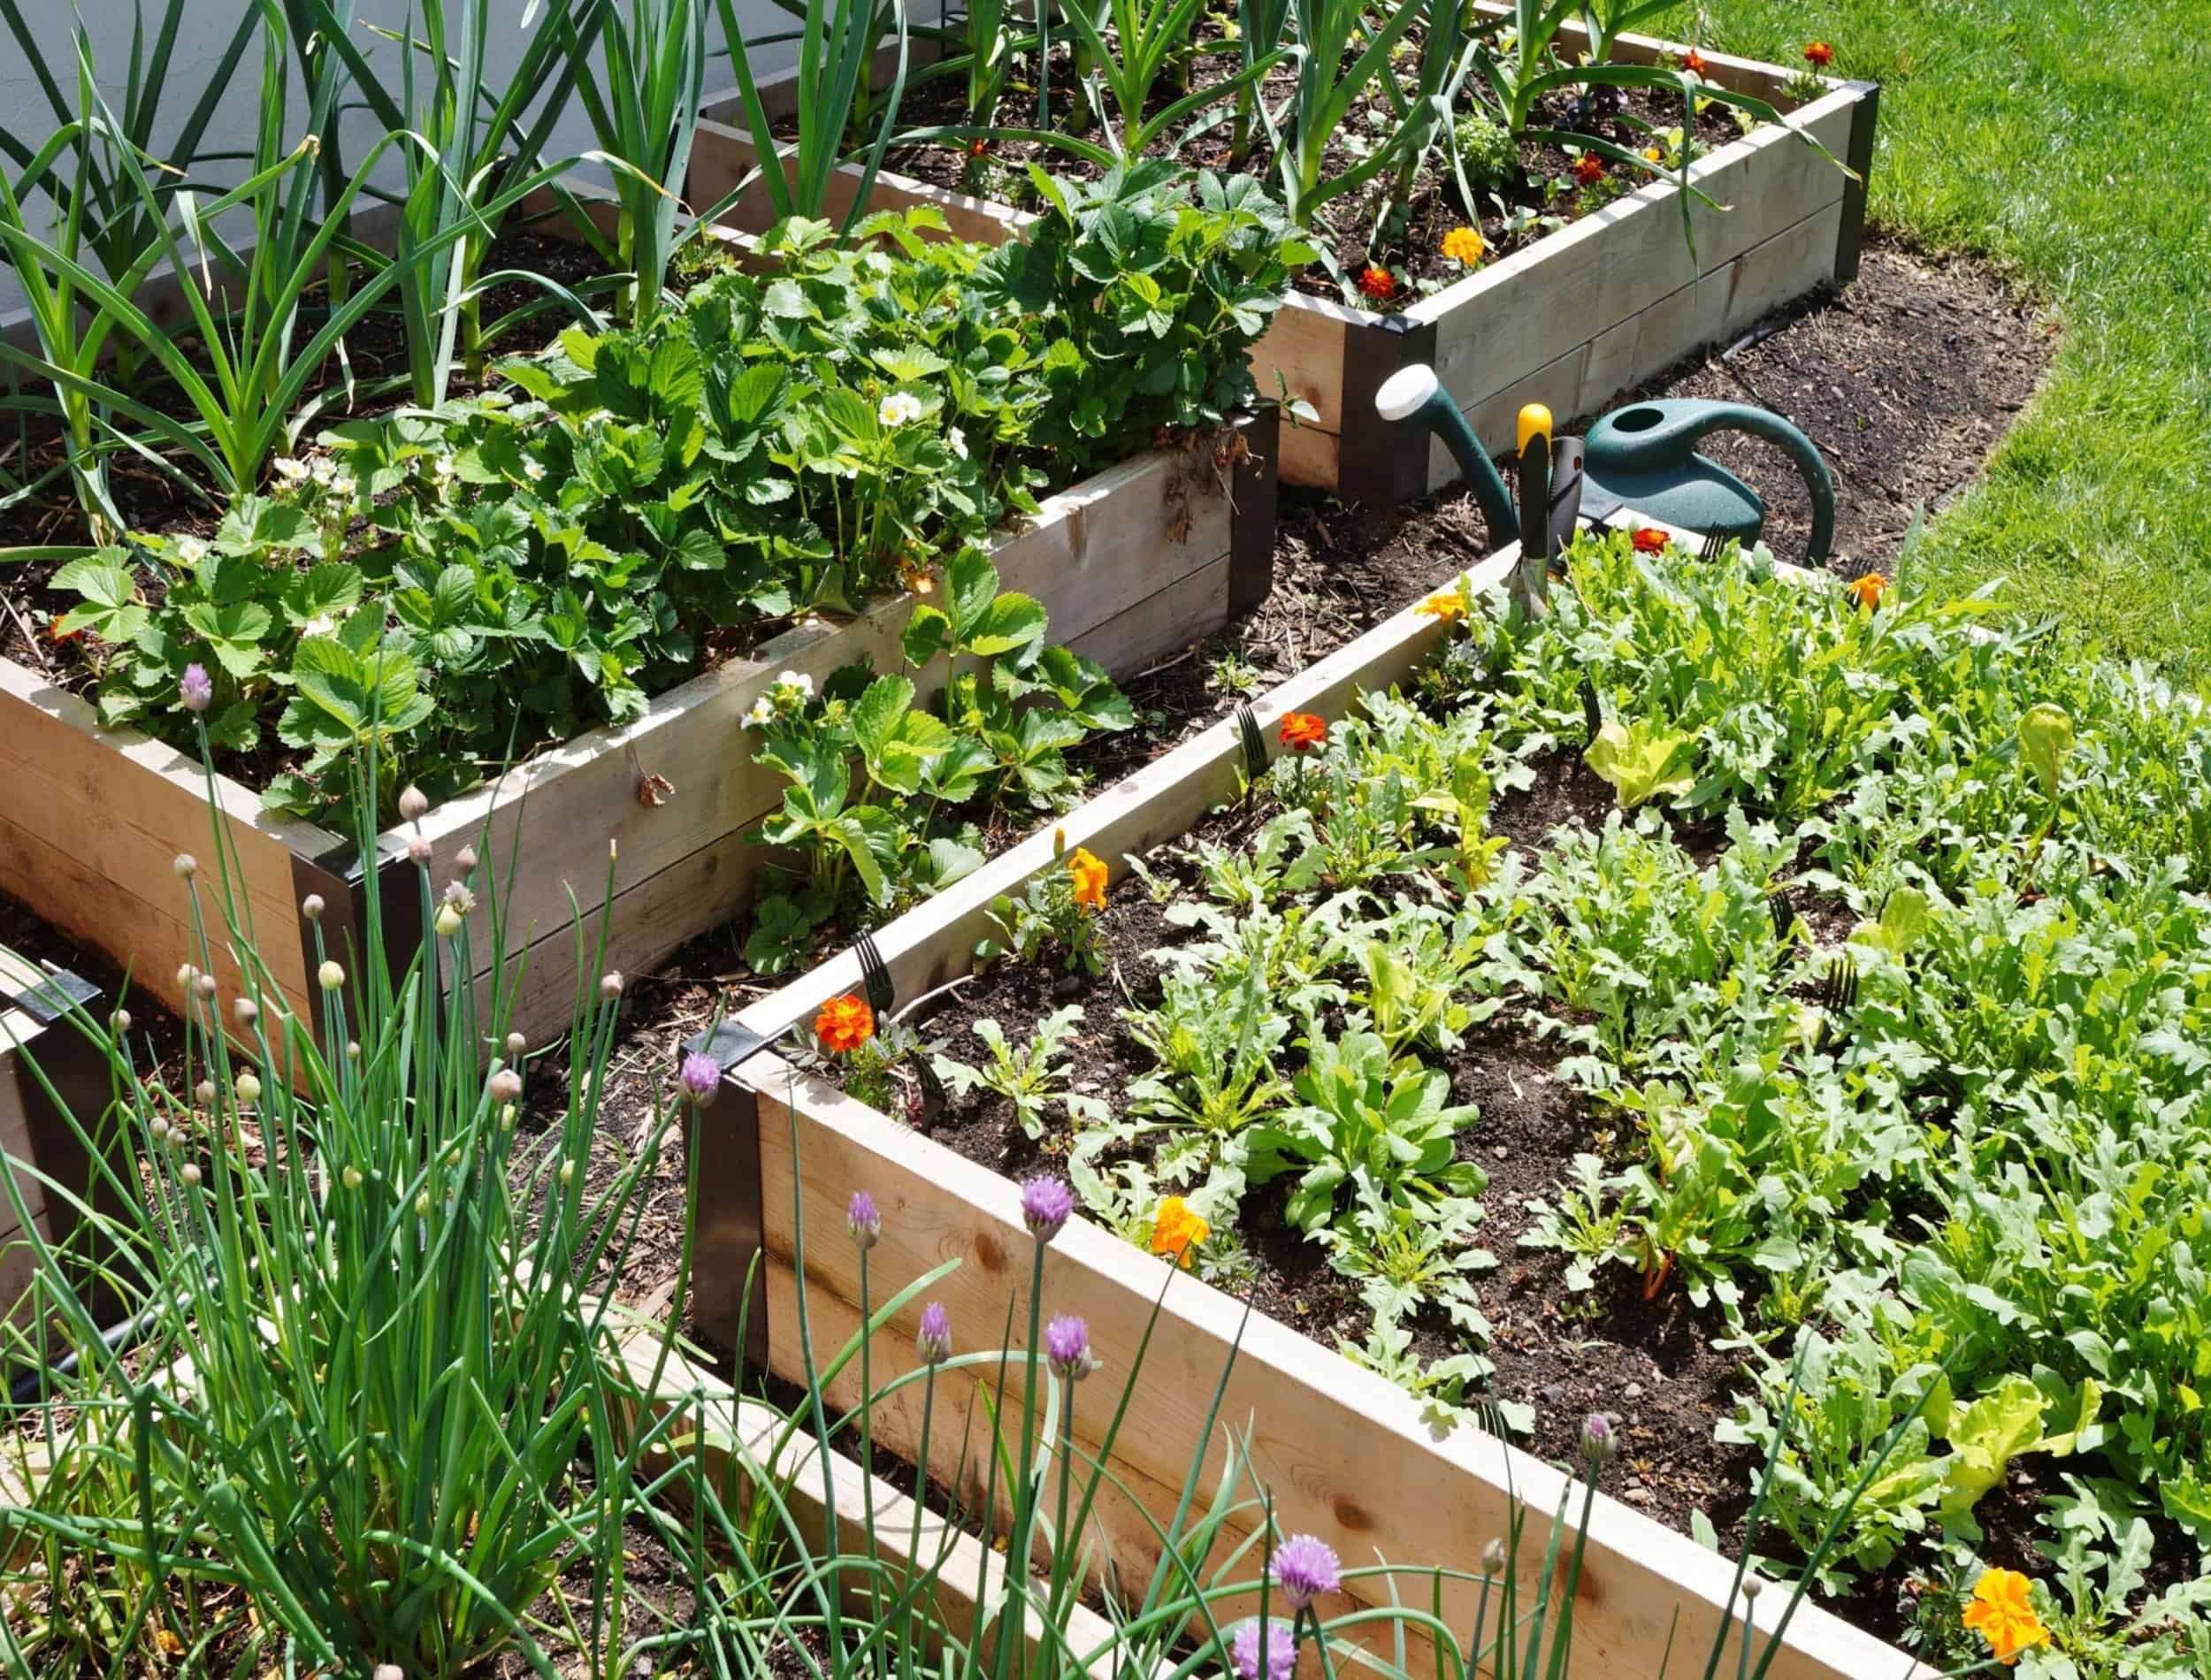 Raised bed vegetable garden box in spring for crop rotation